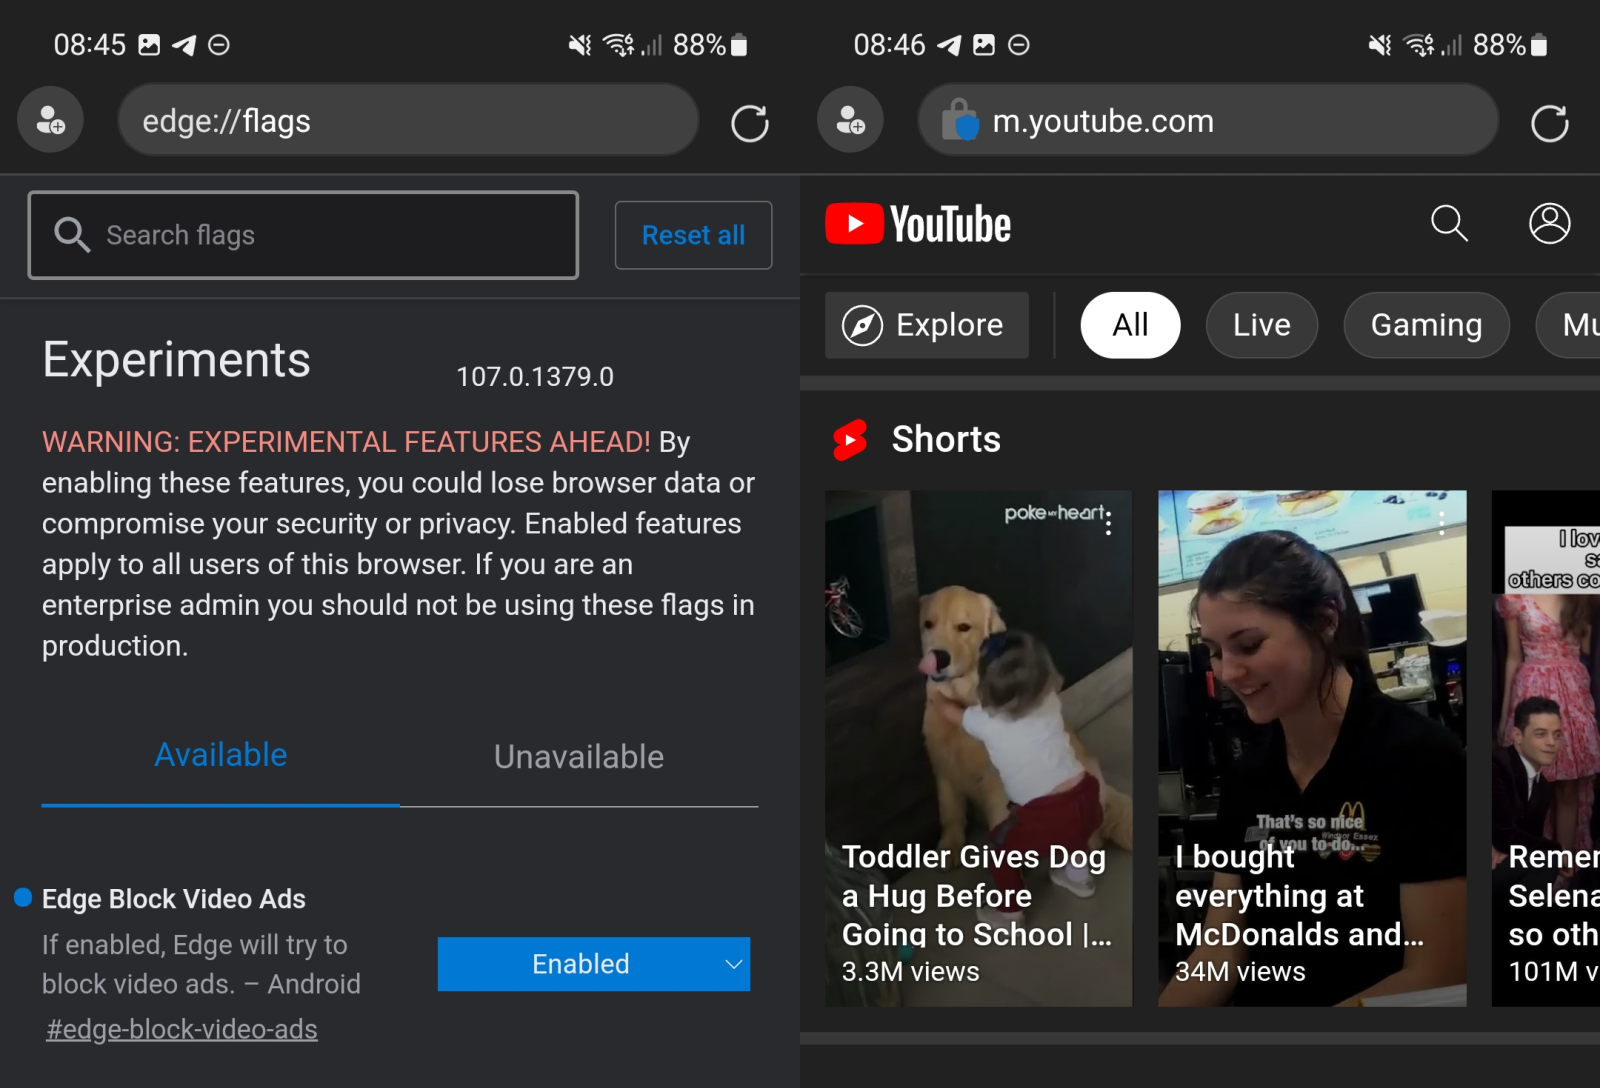 Microsoft is testing an video ad-blocker in Edge for Android